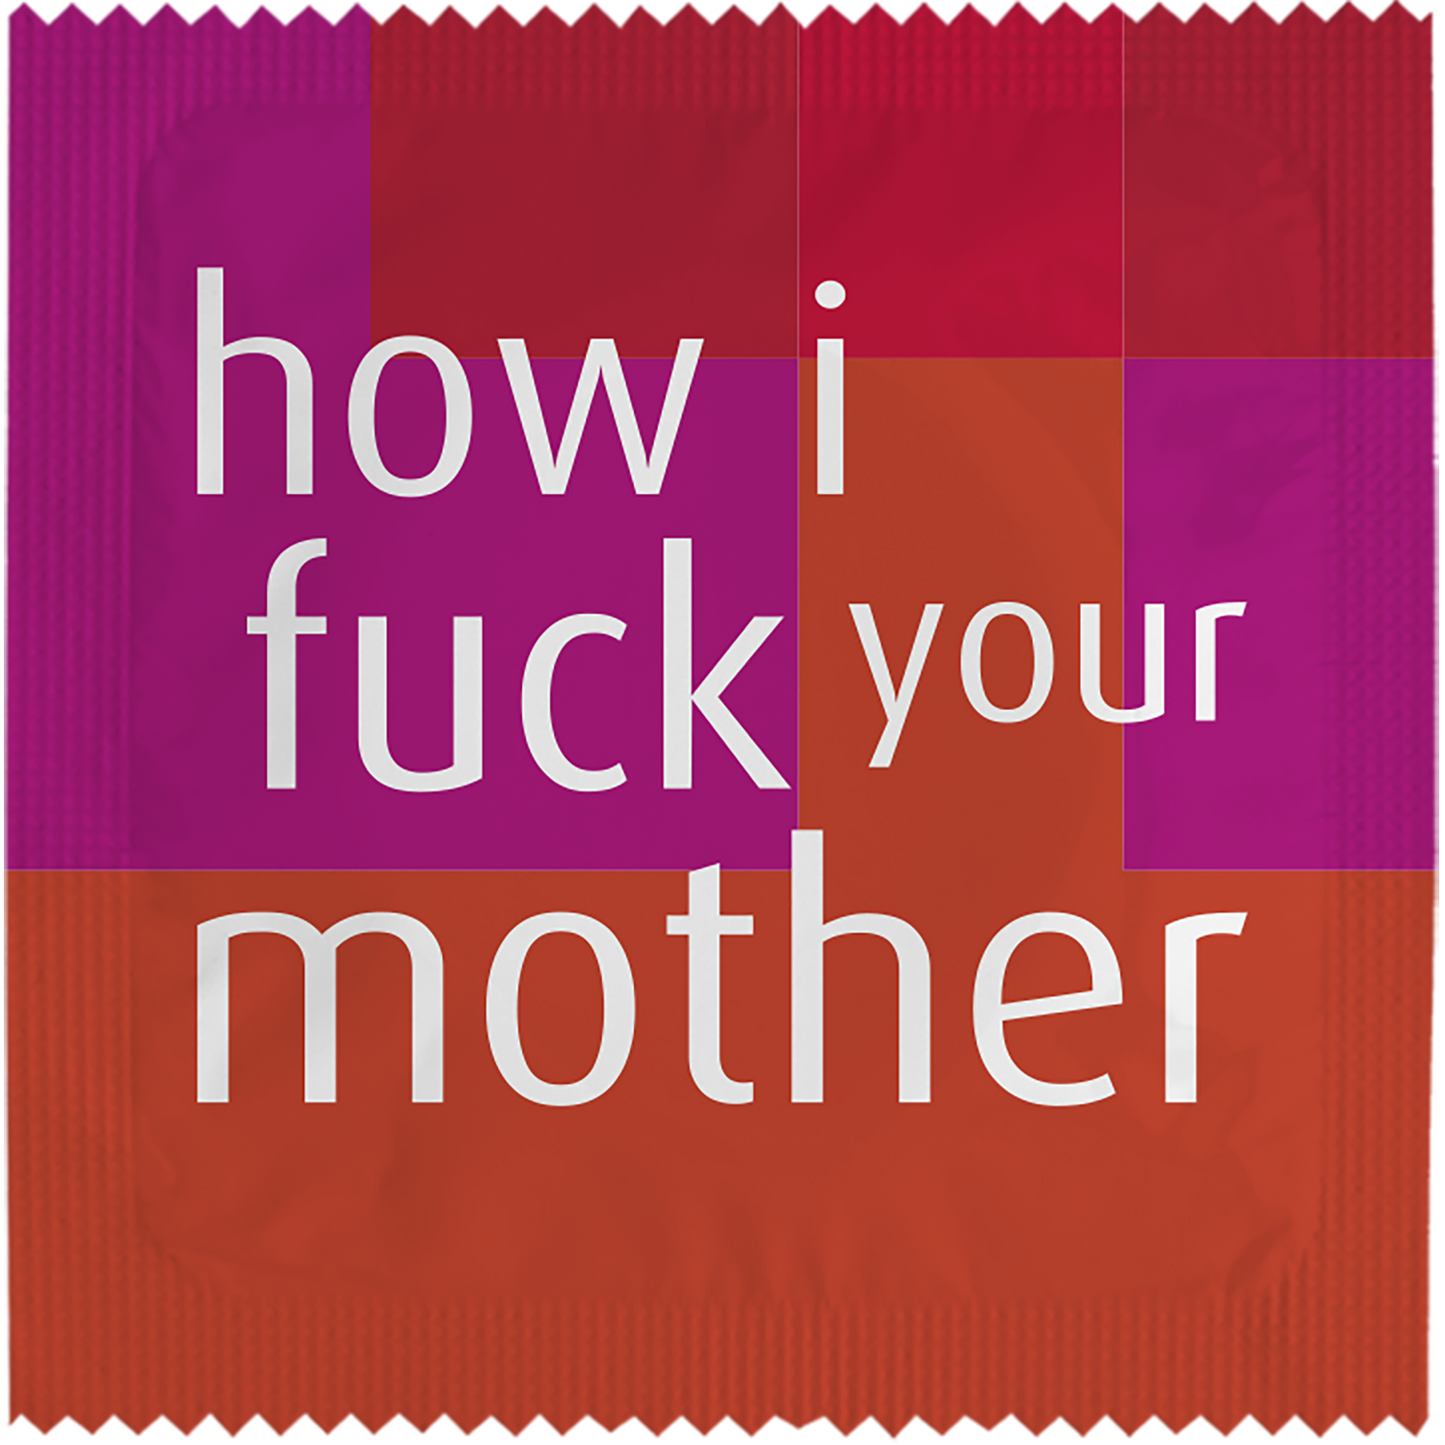 Image of funny condom "How I Fuck Your Mother"